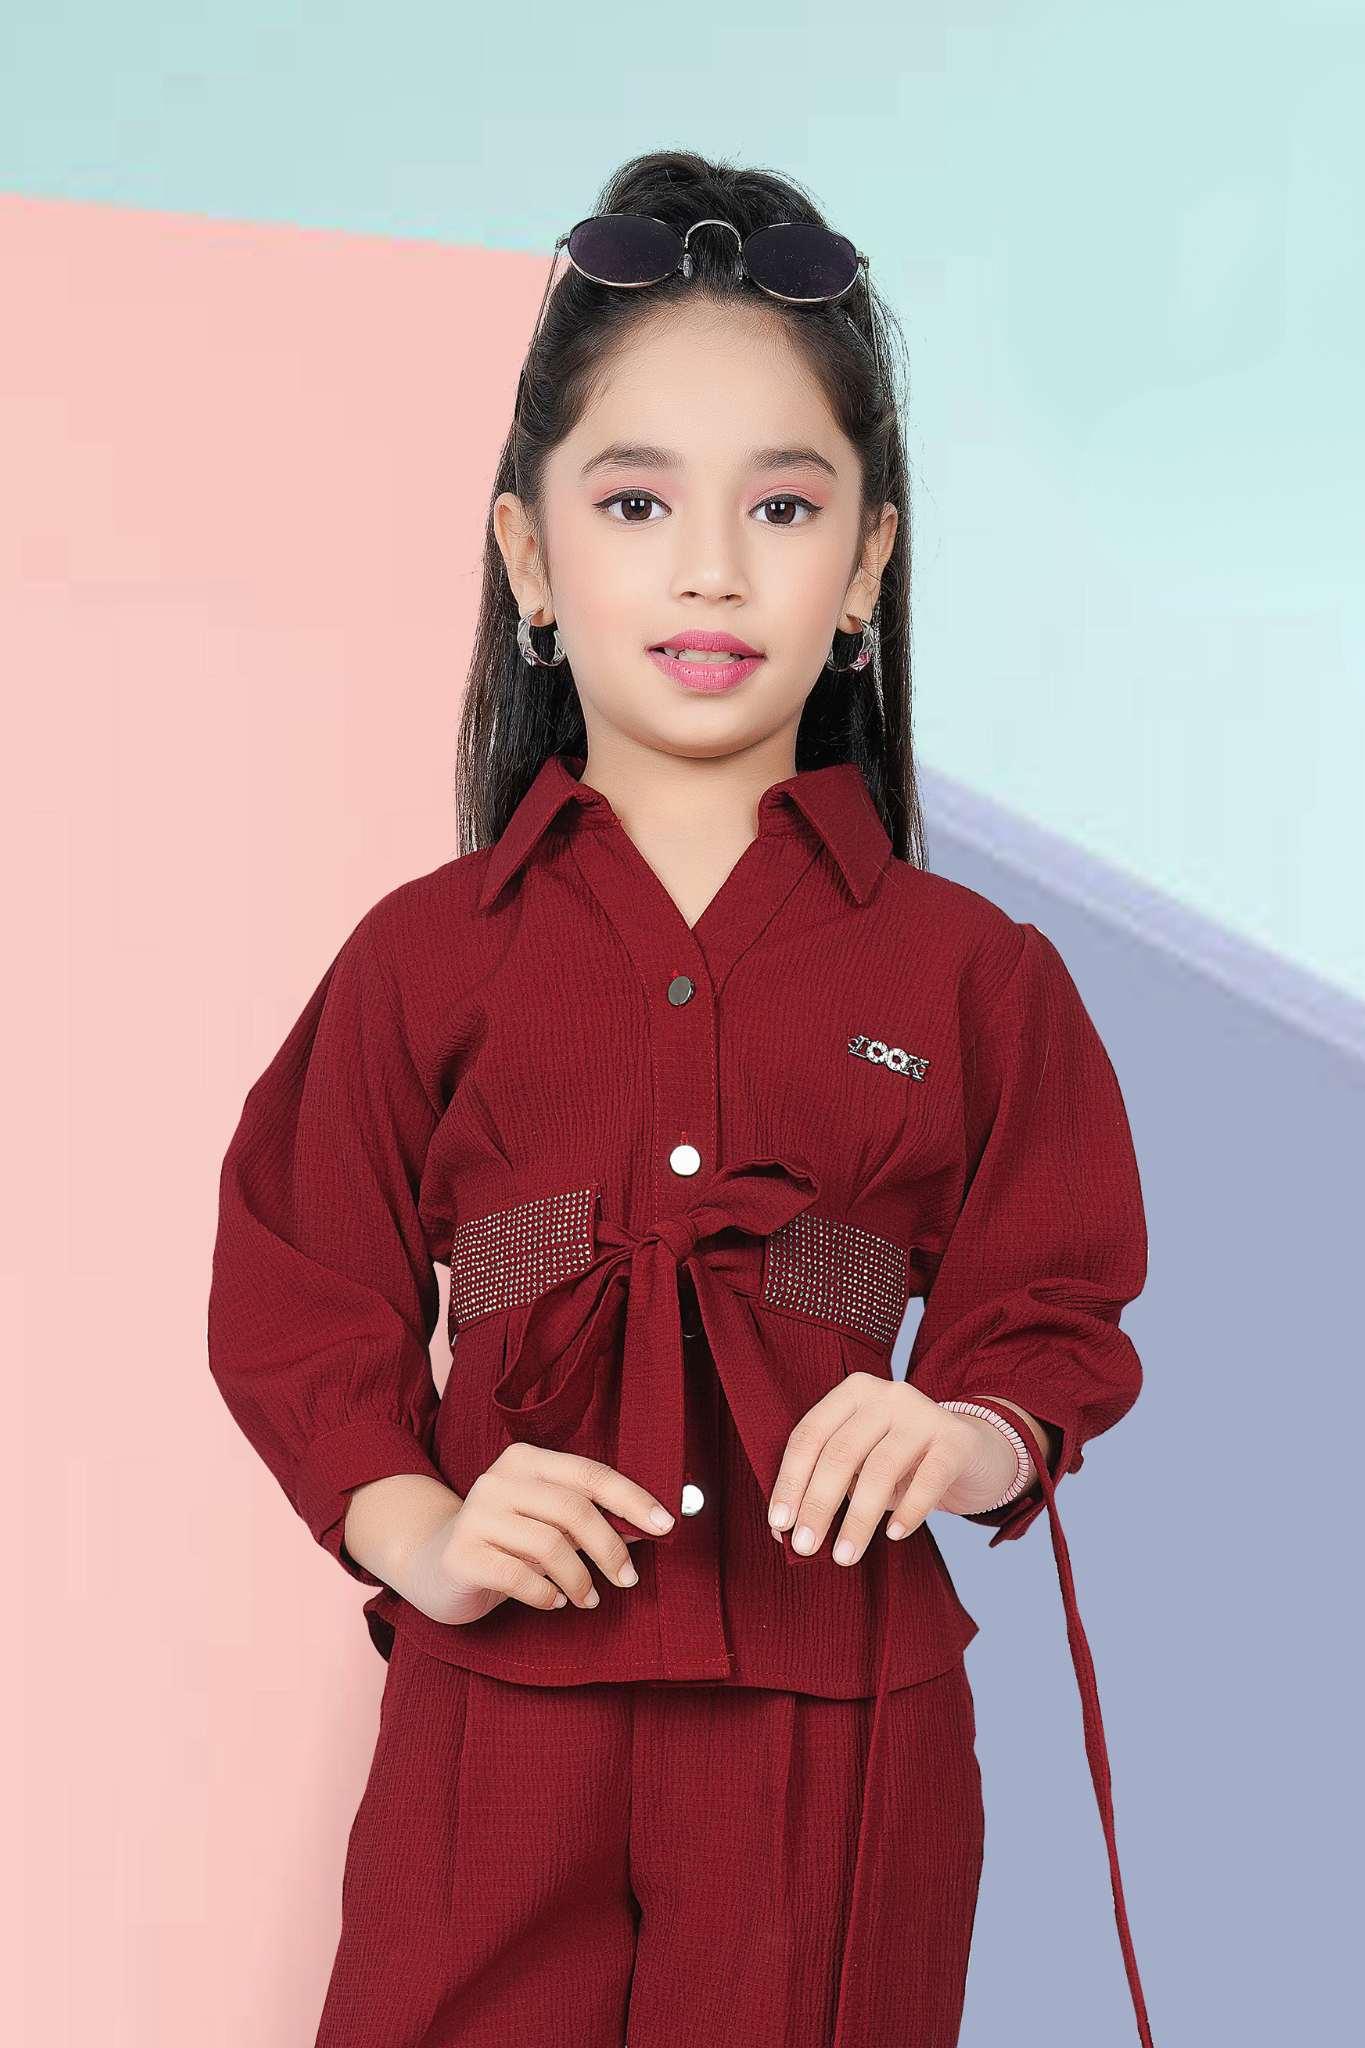 Fancy Maroon Casual Co-ord Set For Girls - Lagorii Kids